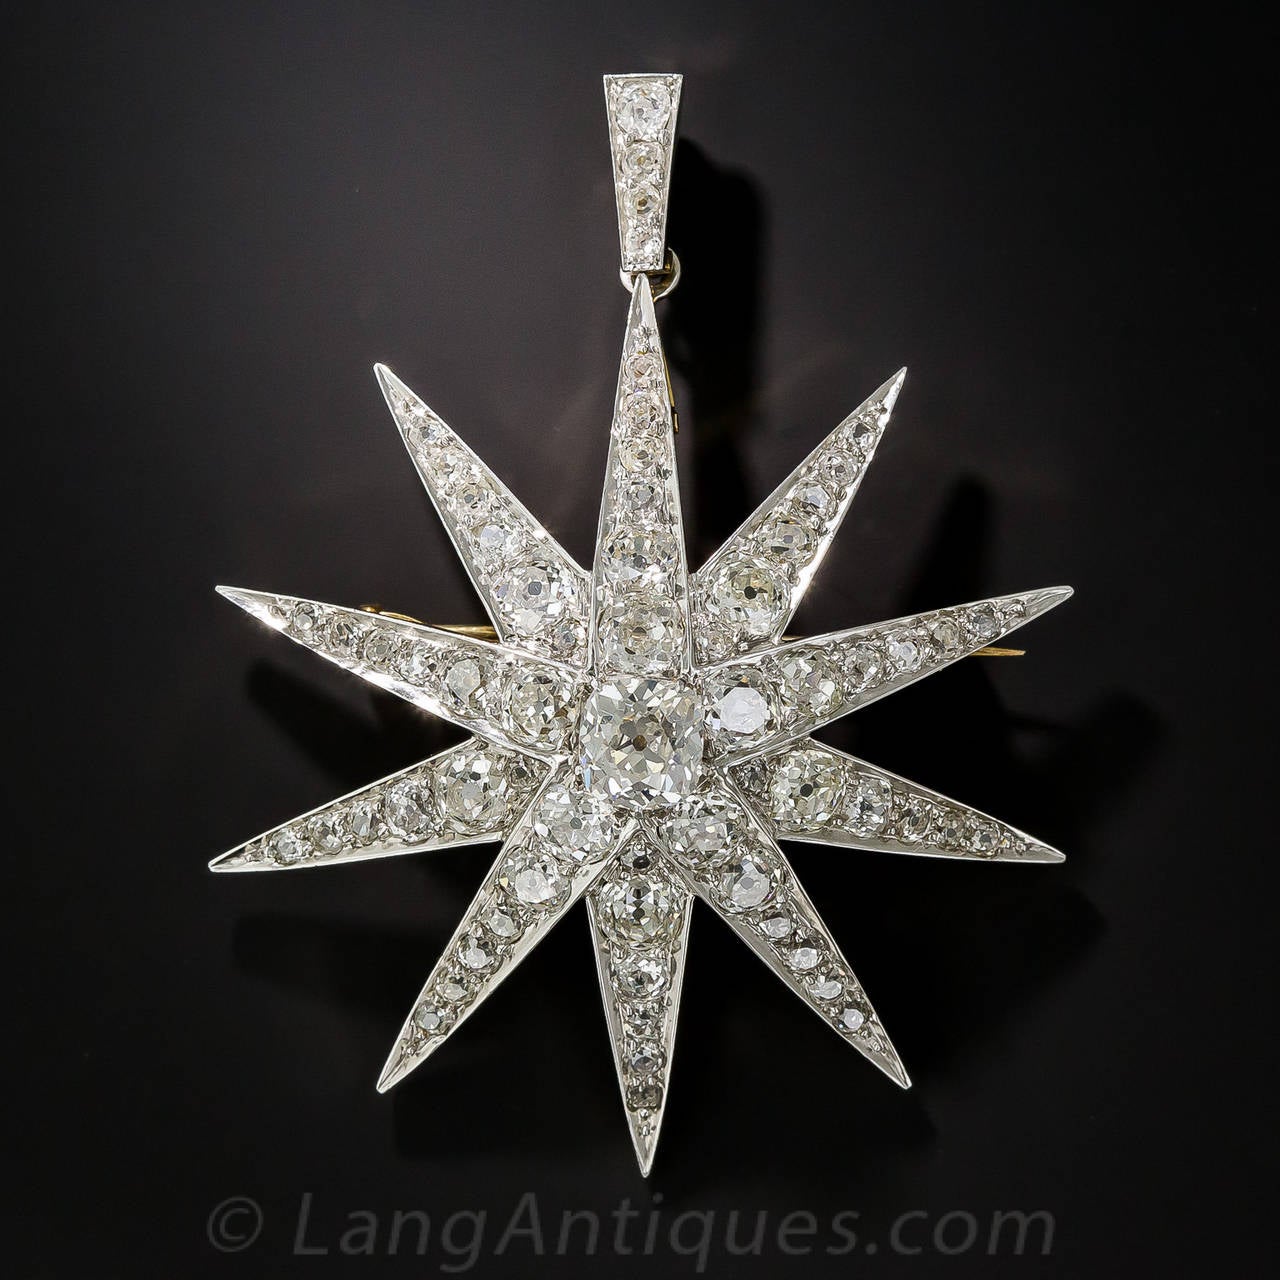 This late-19th century diamond star brooch/pendant is undoubtedly one of the most glorious and impressive examples of this motif we have ever had in our collection. Hand fabricated in platinum over 18K yellow gold, the 10 rays of this blazing